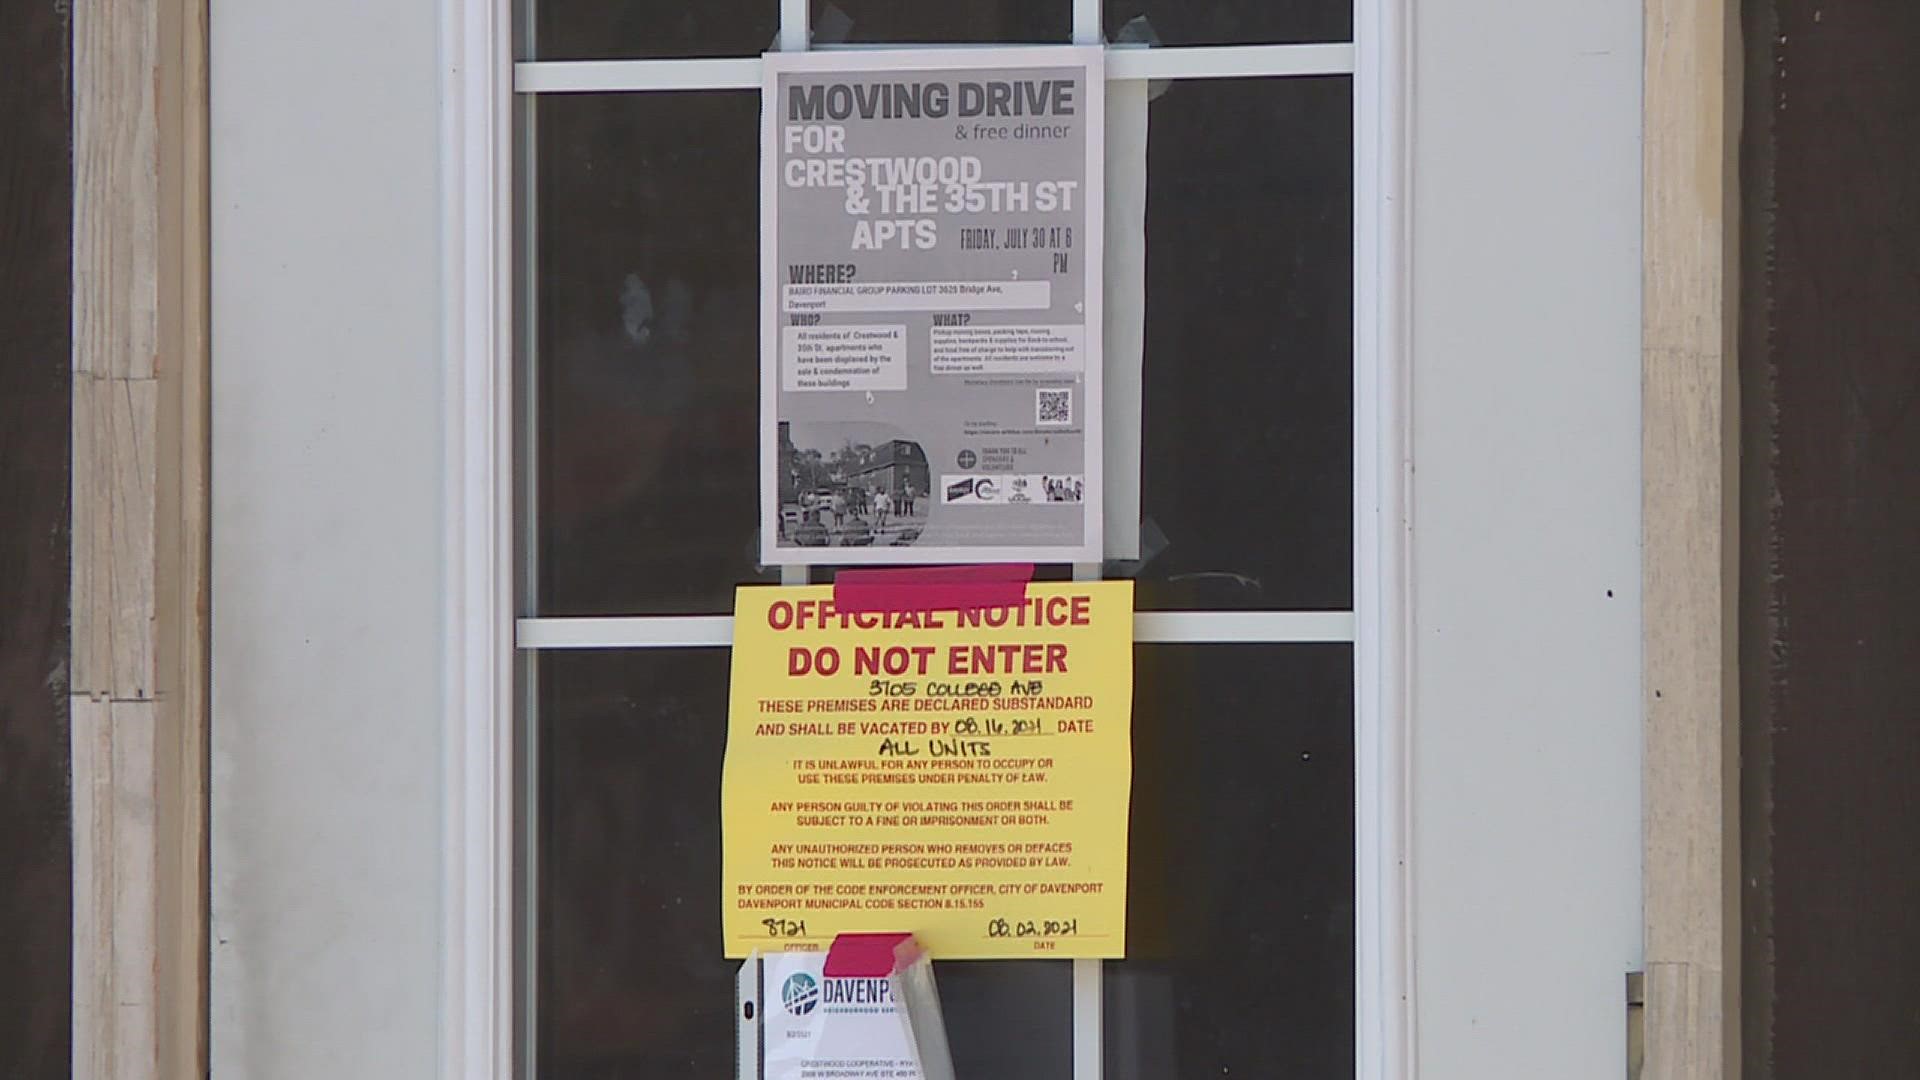 The apartment complex is being condemned after failing code inspections more than once.